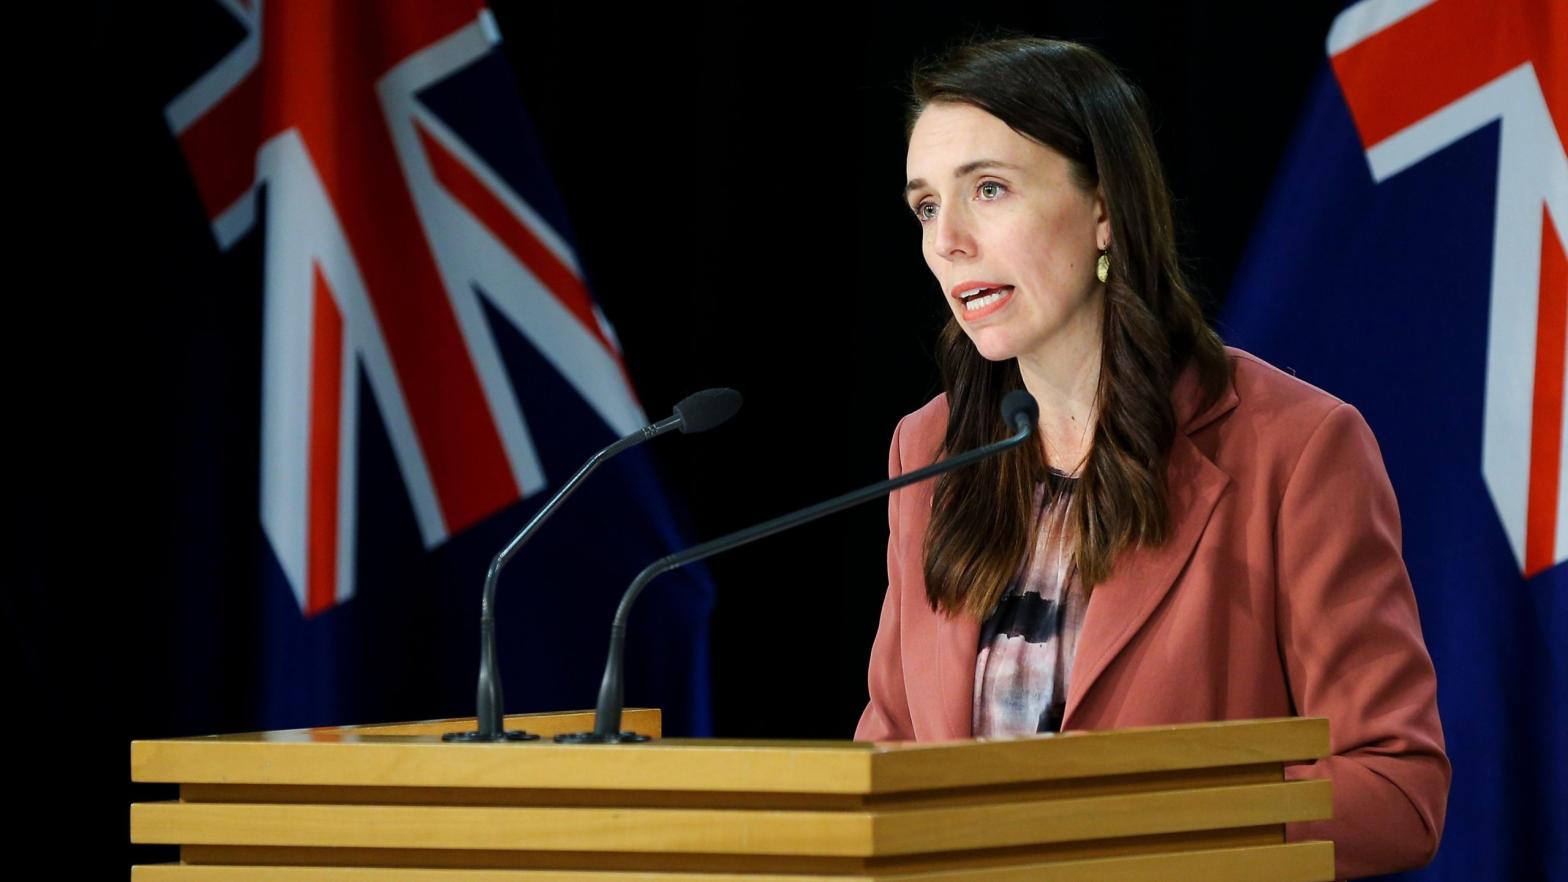 Prime Minister Jacinda Ardern speaks to media during a press conference at Parliament on August 17, 2021 in Wellington, New Zealand. (Photo: Hagen Hopkins, Getty Images)